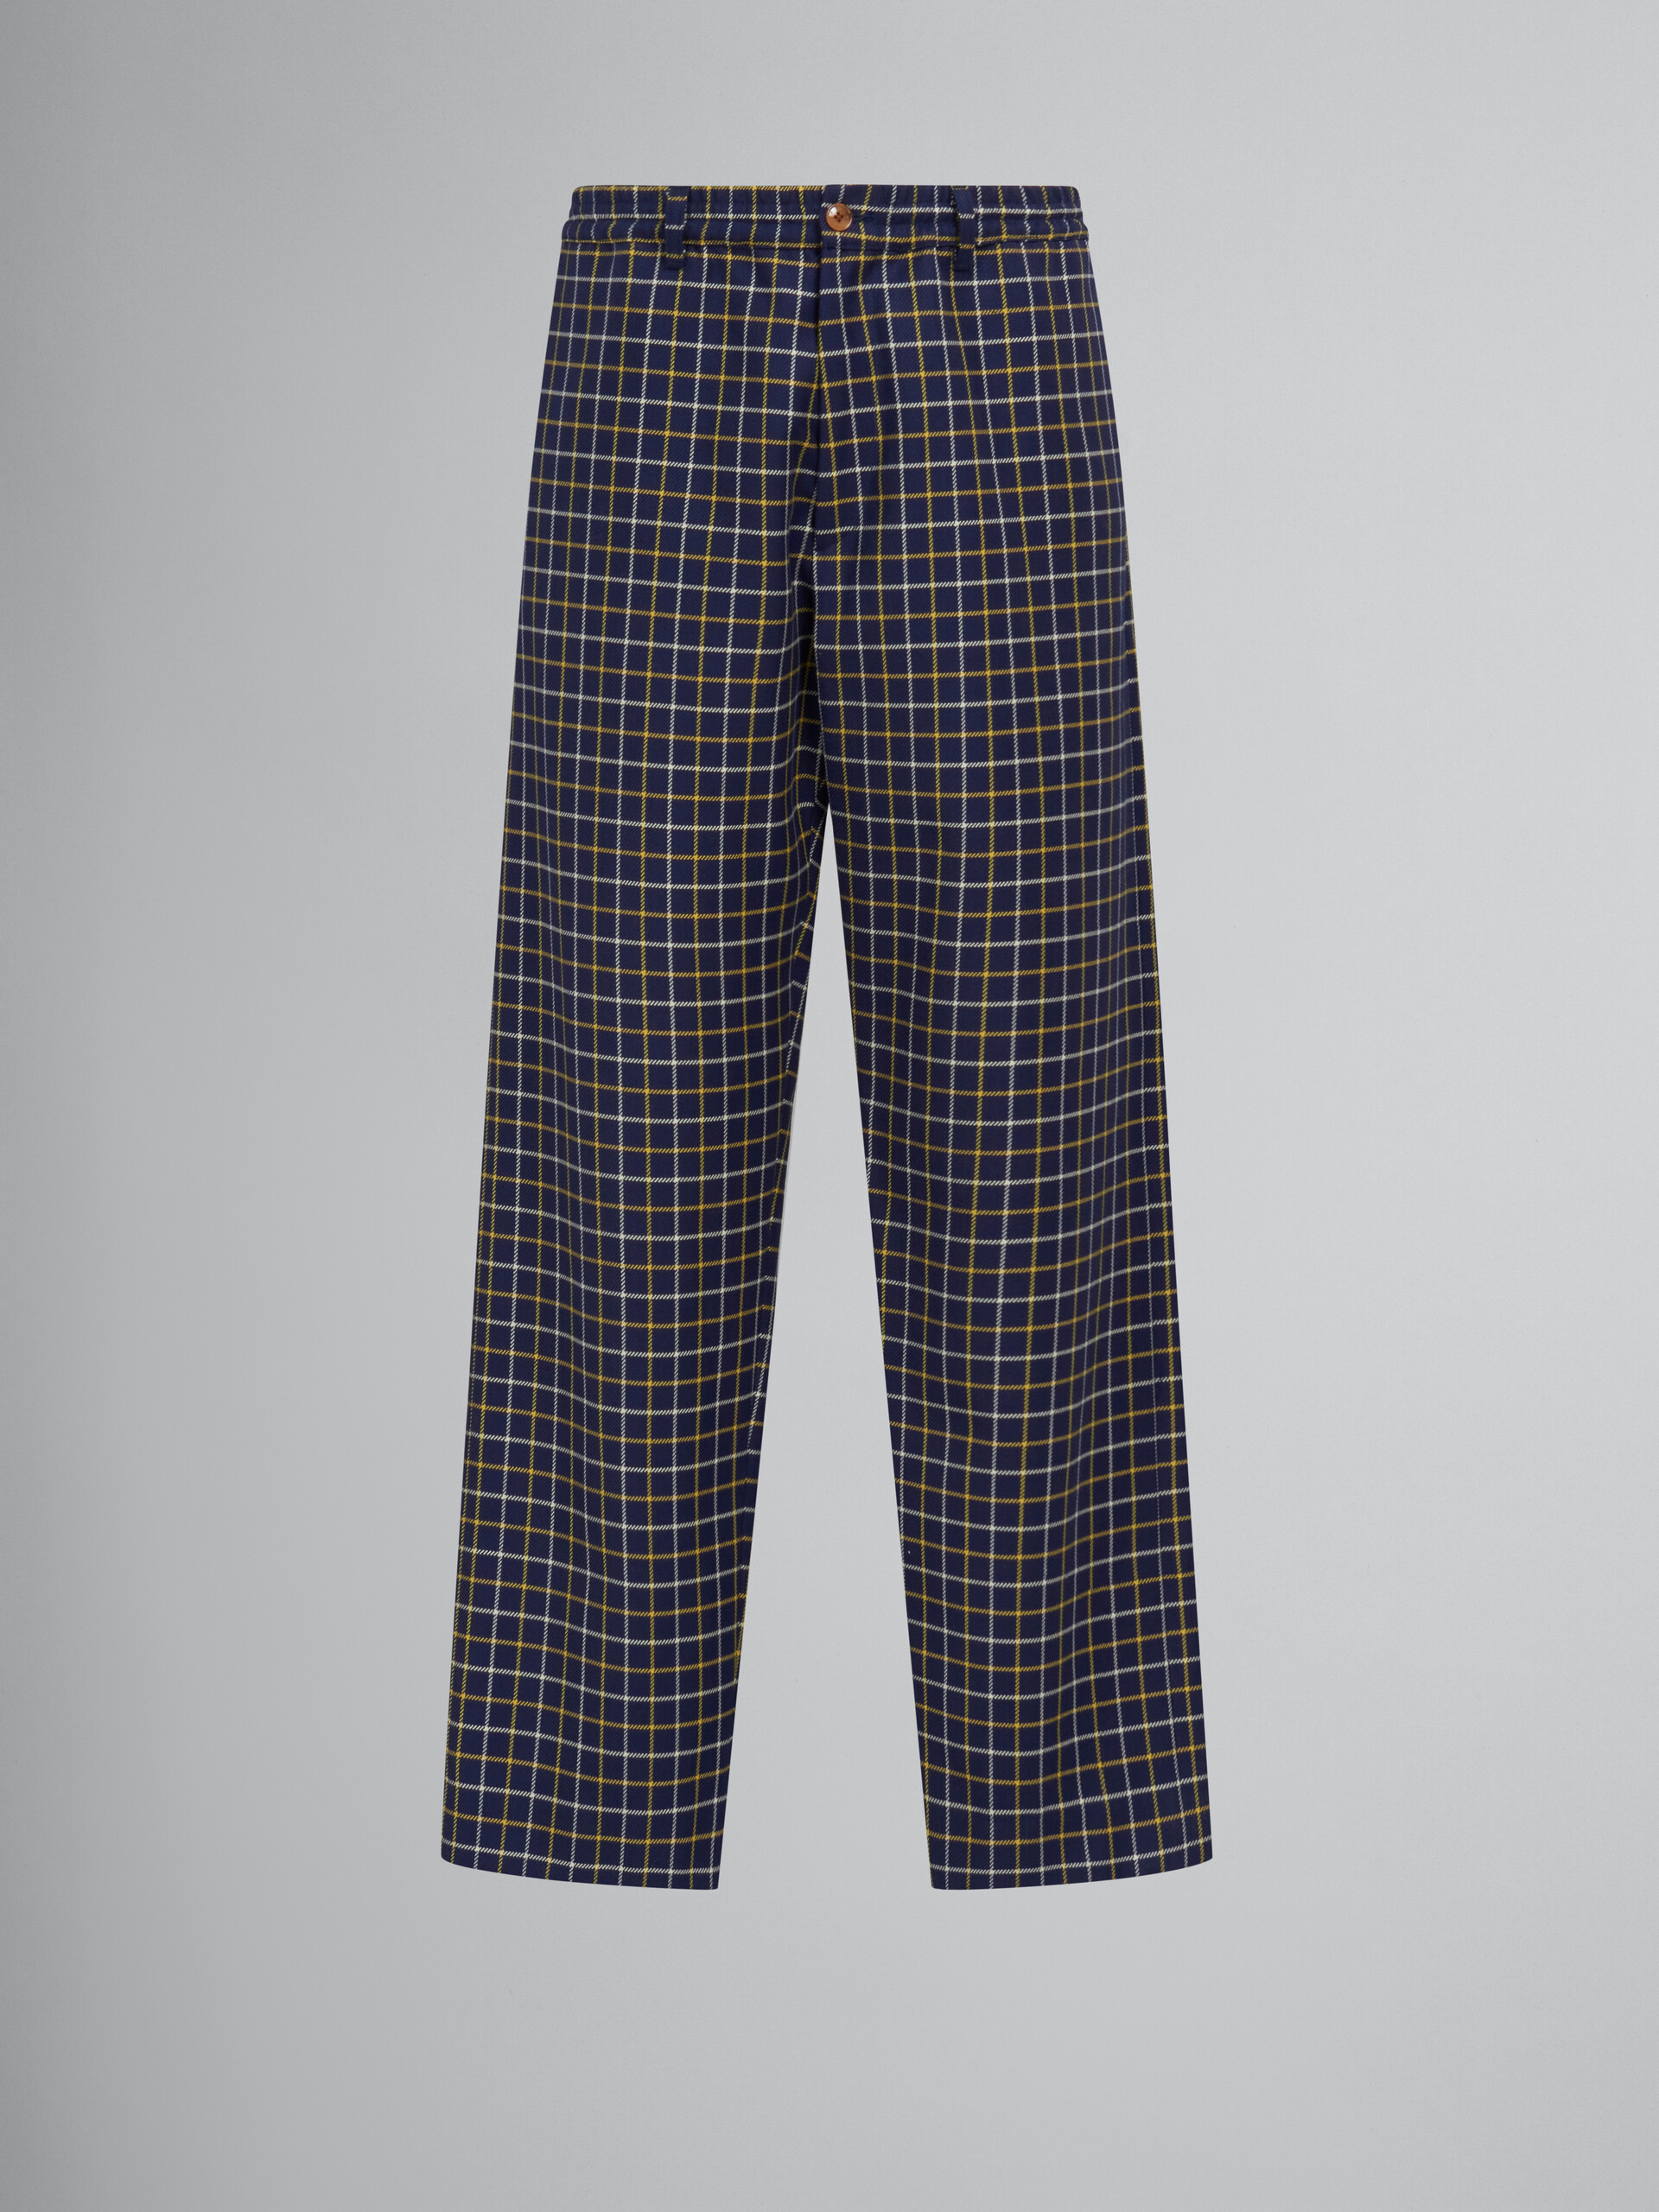 Blue checked wool and cotton track pants - Pants - Image 1